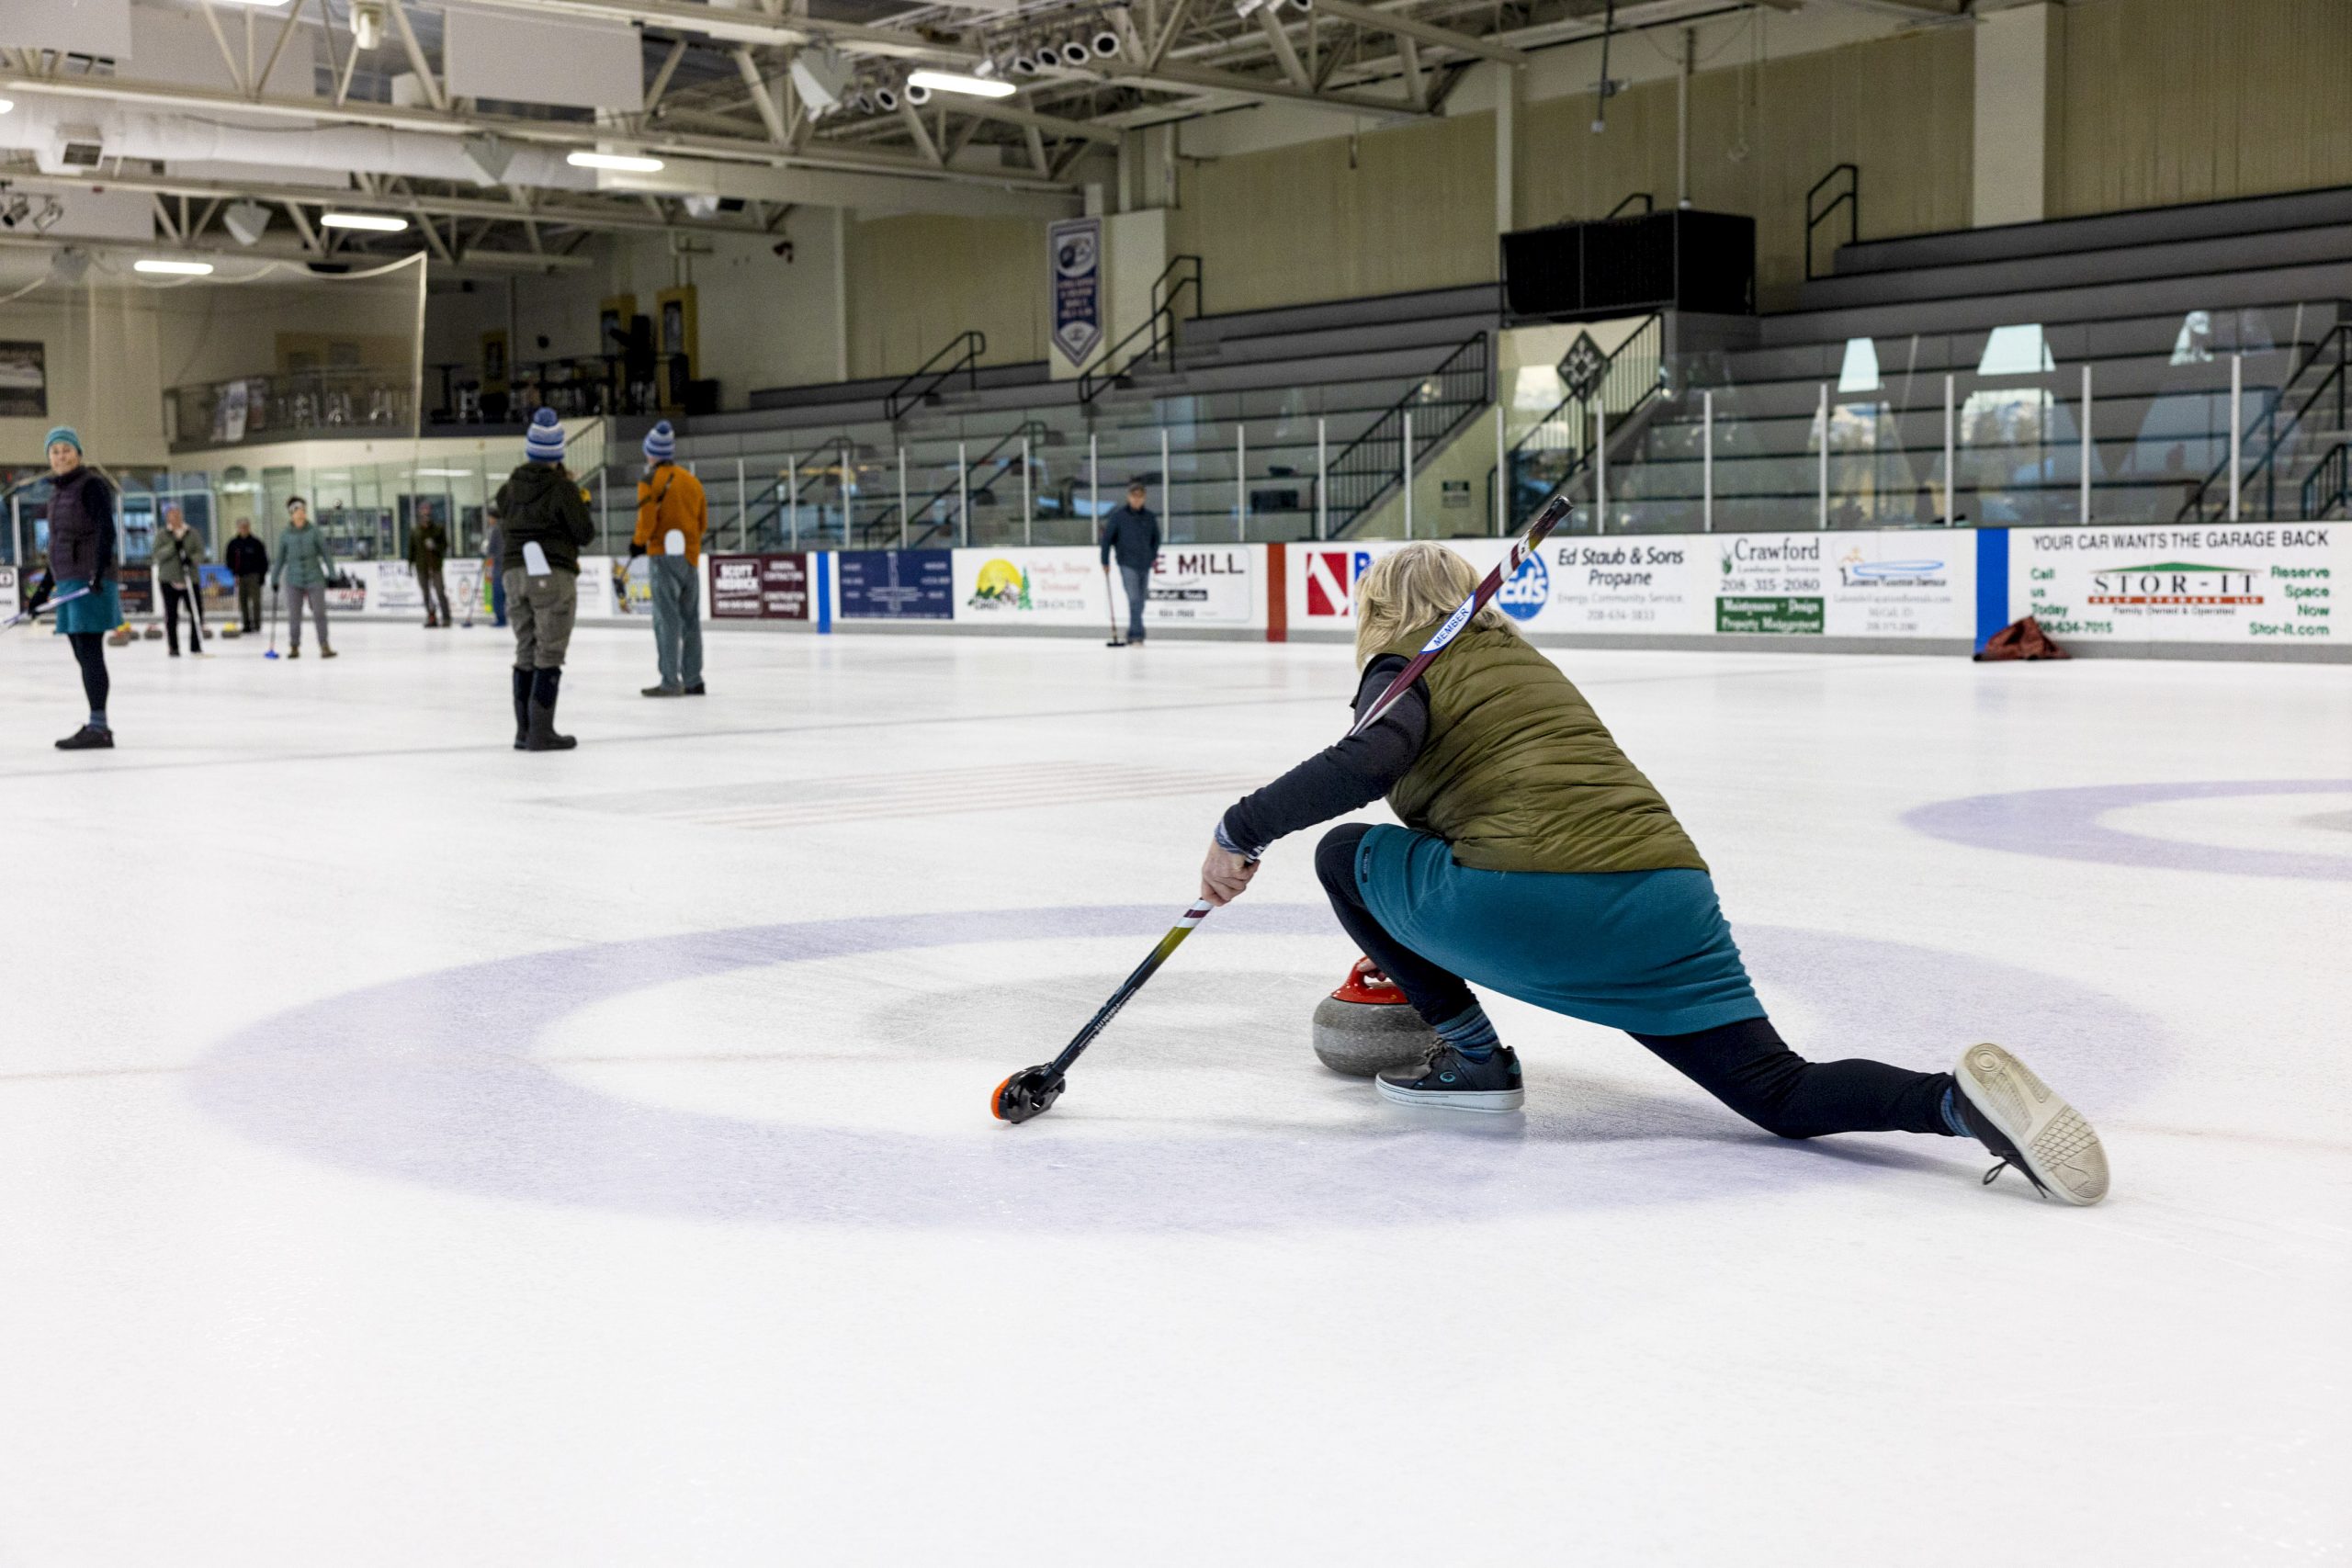 Learn Something New: Curling